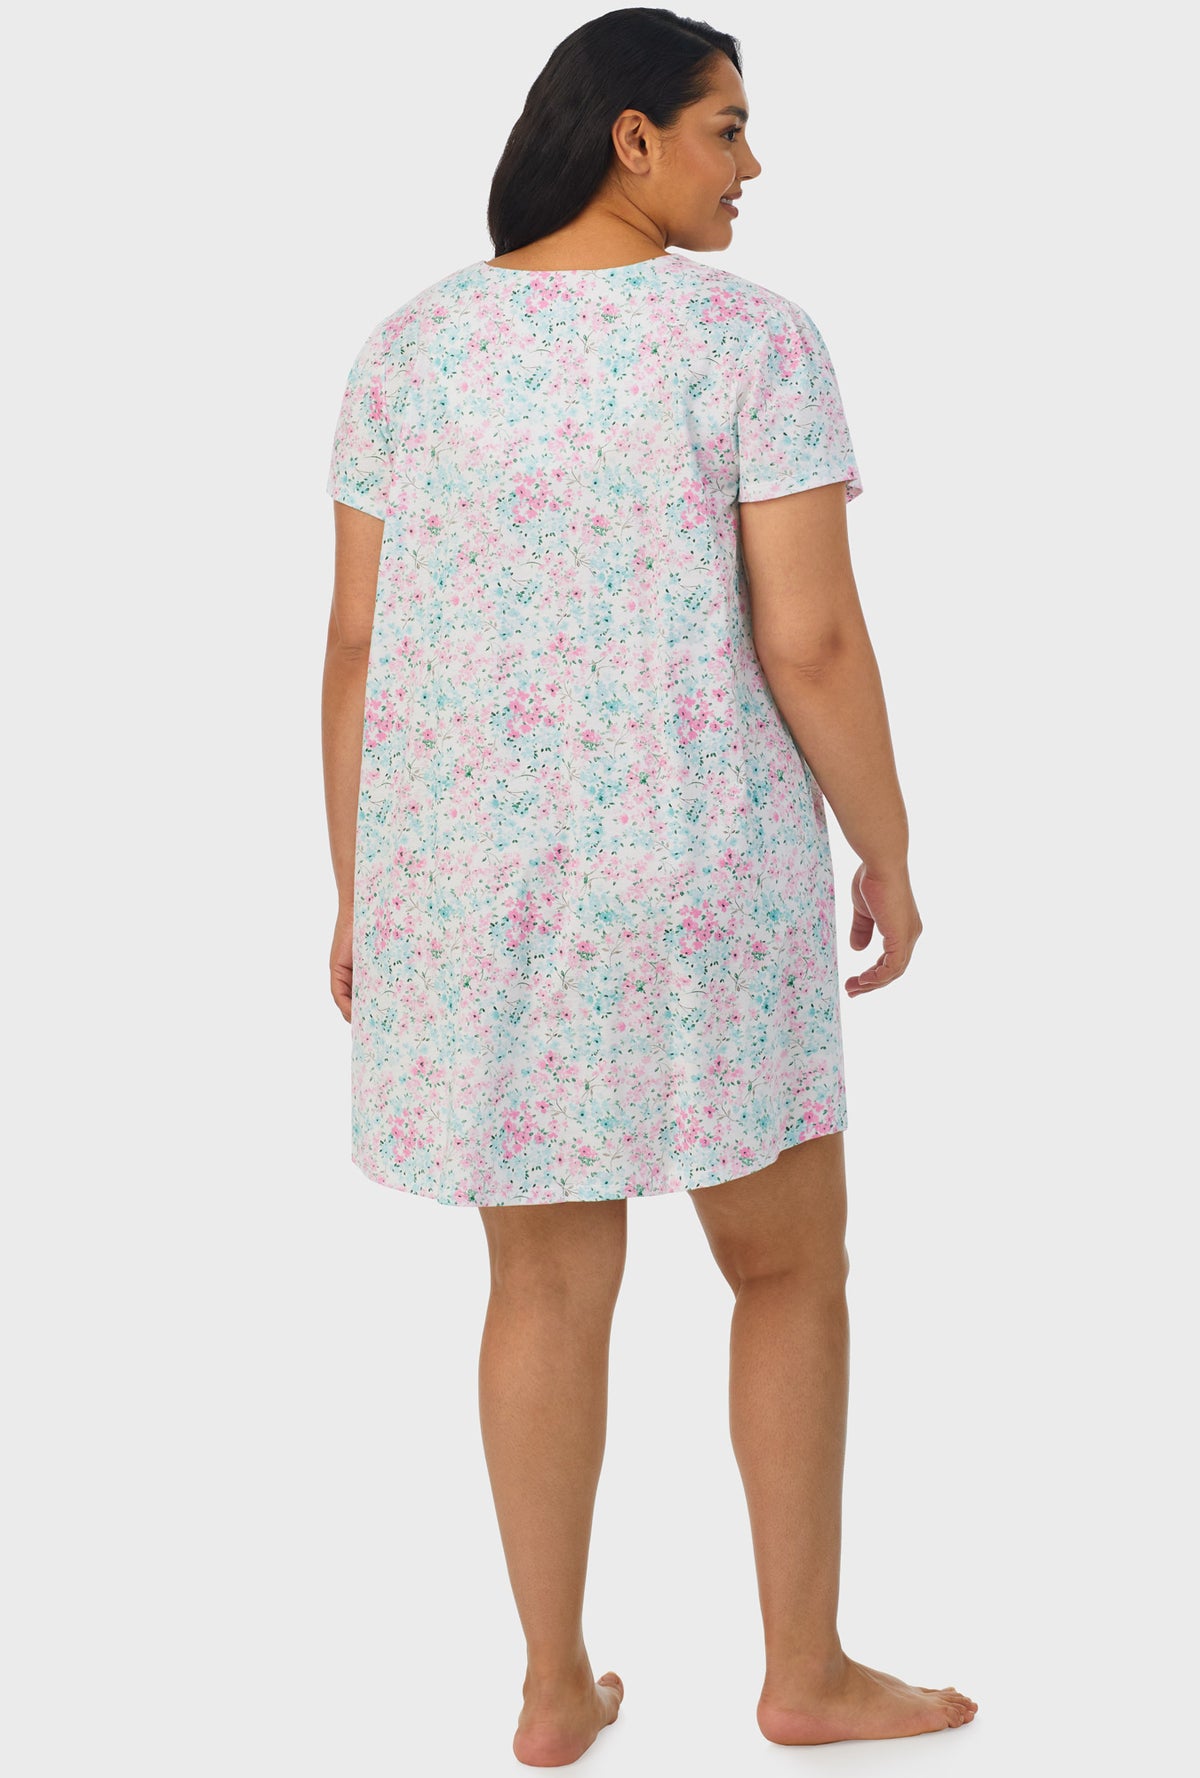 A lady wearing white cap sleeve plus size nightshirt with aqua and pink floral print.